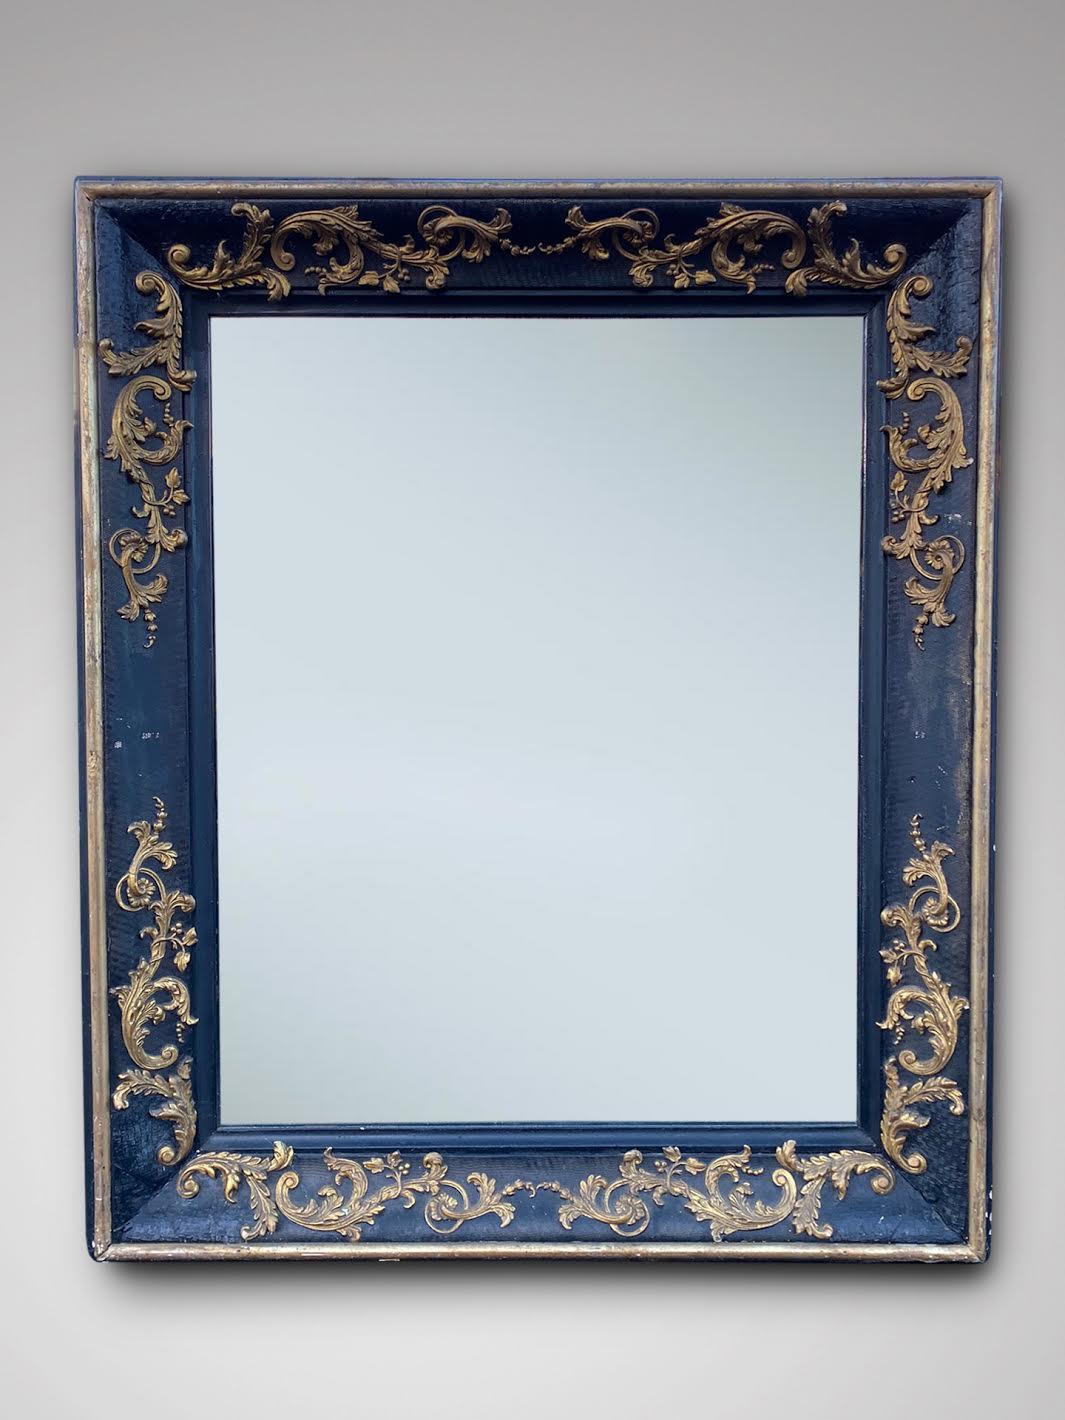 An attractive 19th century French Empire rectangular frame wall mirror. The deep square frame with ebonized black wood frame and gold gilt accent details emphasize the frame. Very decorative piece. Top quality and great looking piece of